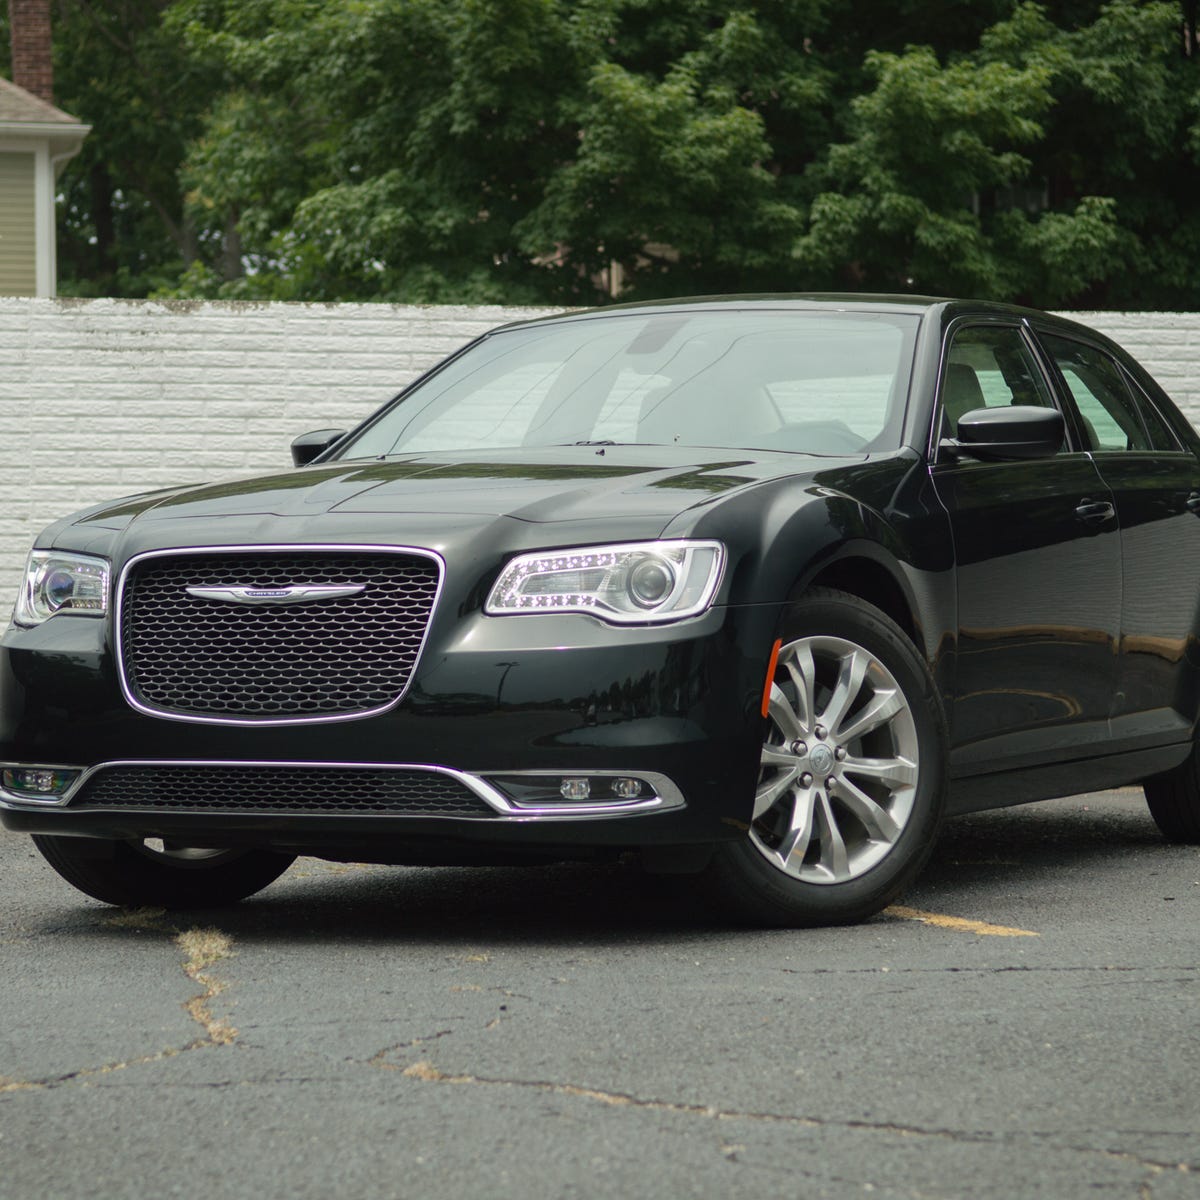 2016 Chrysler 300 Limited AWD review: An old dog that could use some newer  tricks - CNET